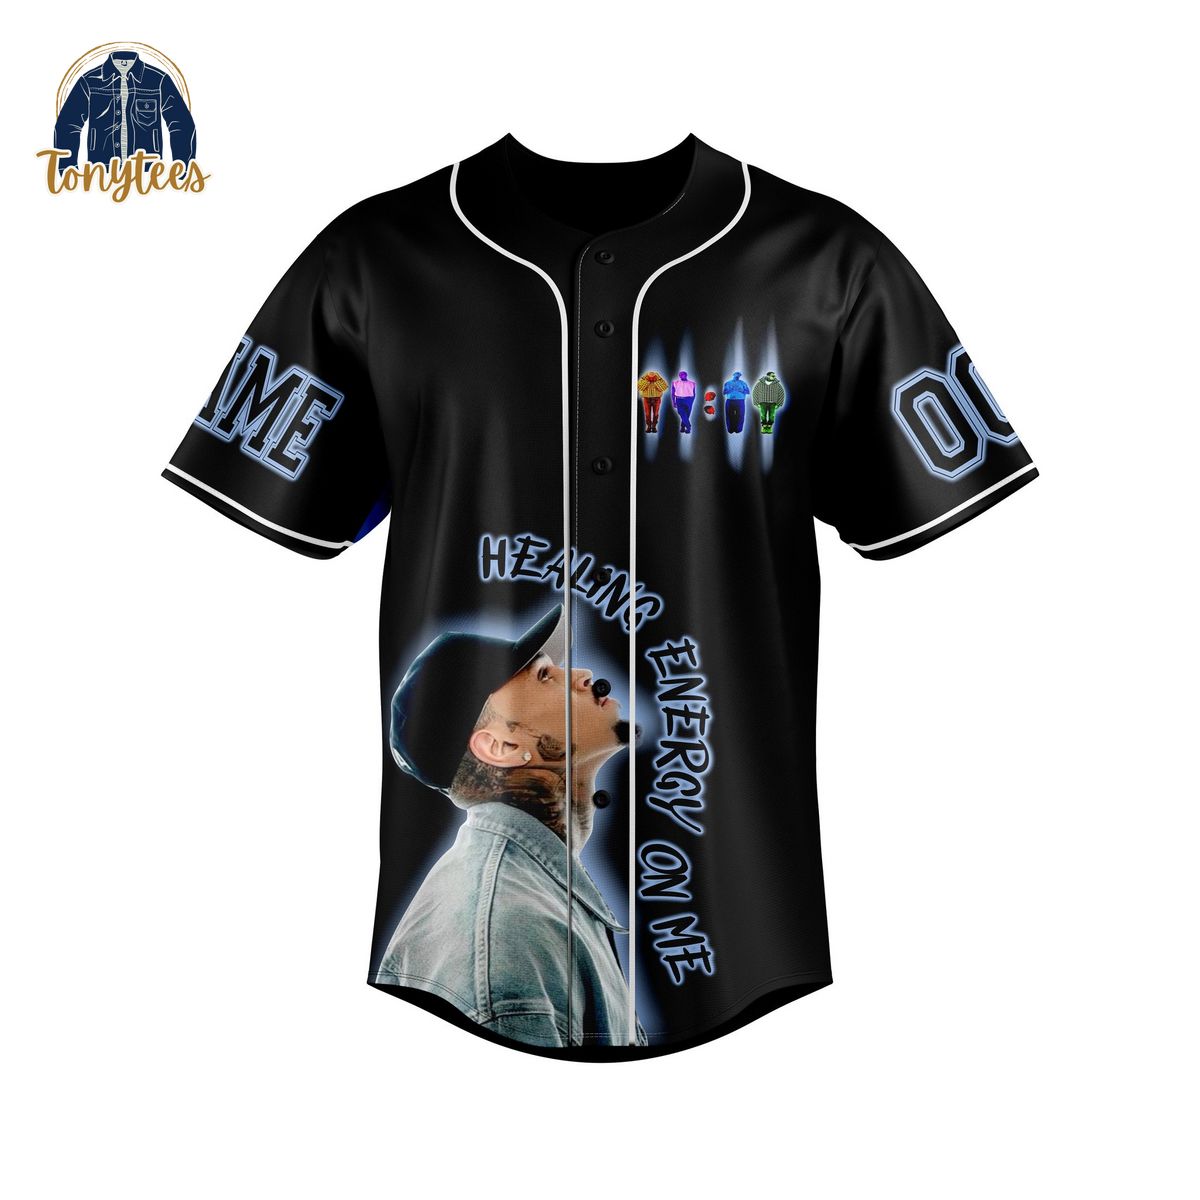 Chris Brown healing energy on me personalized baseball jersey